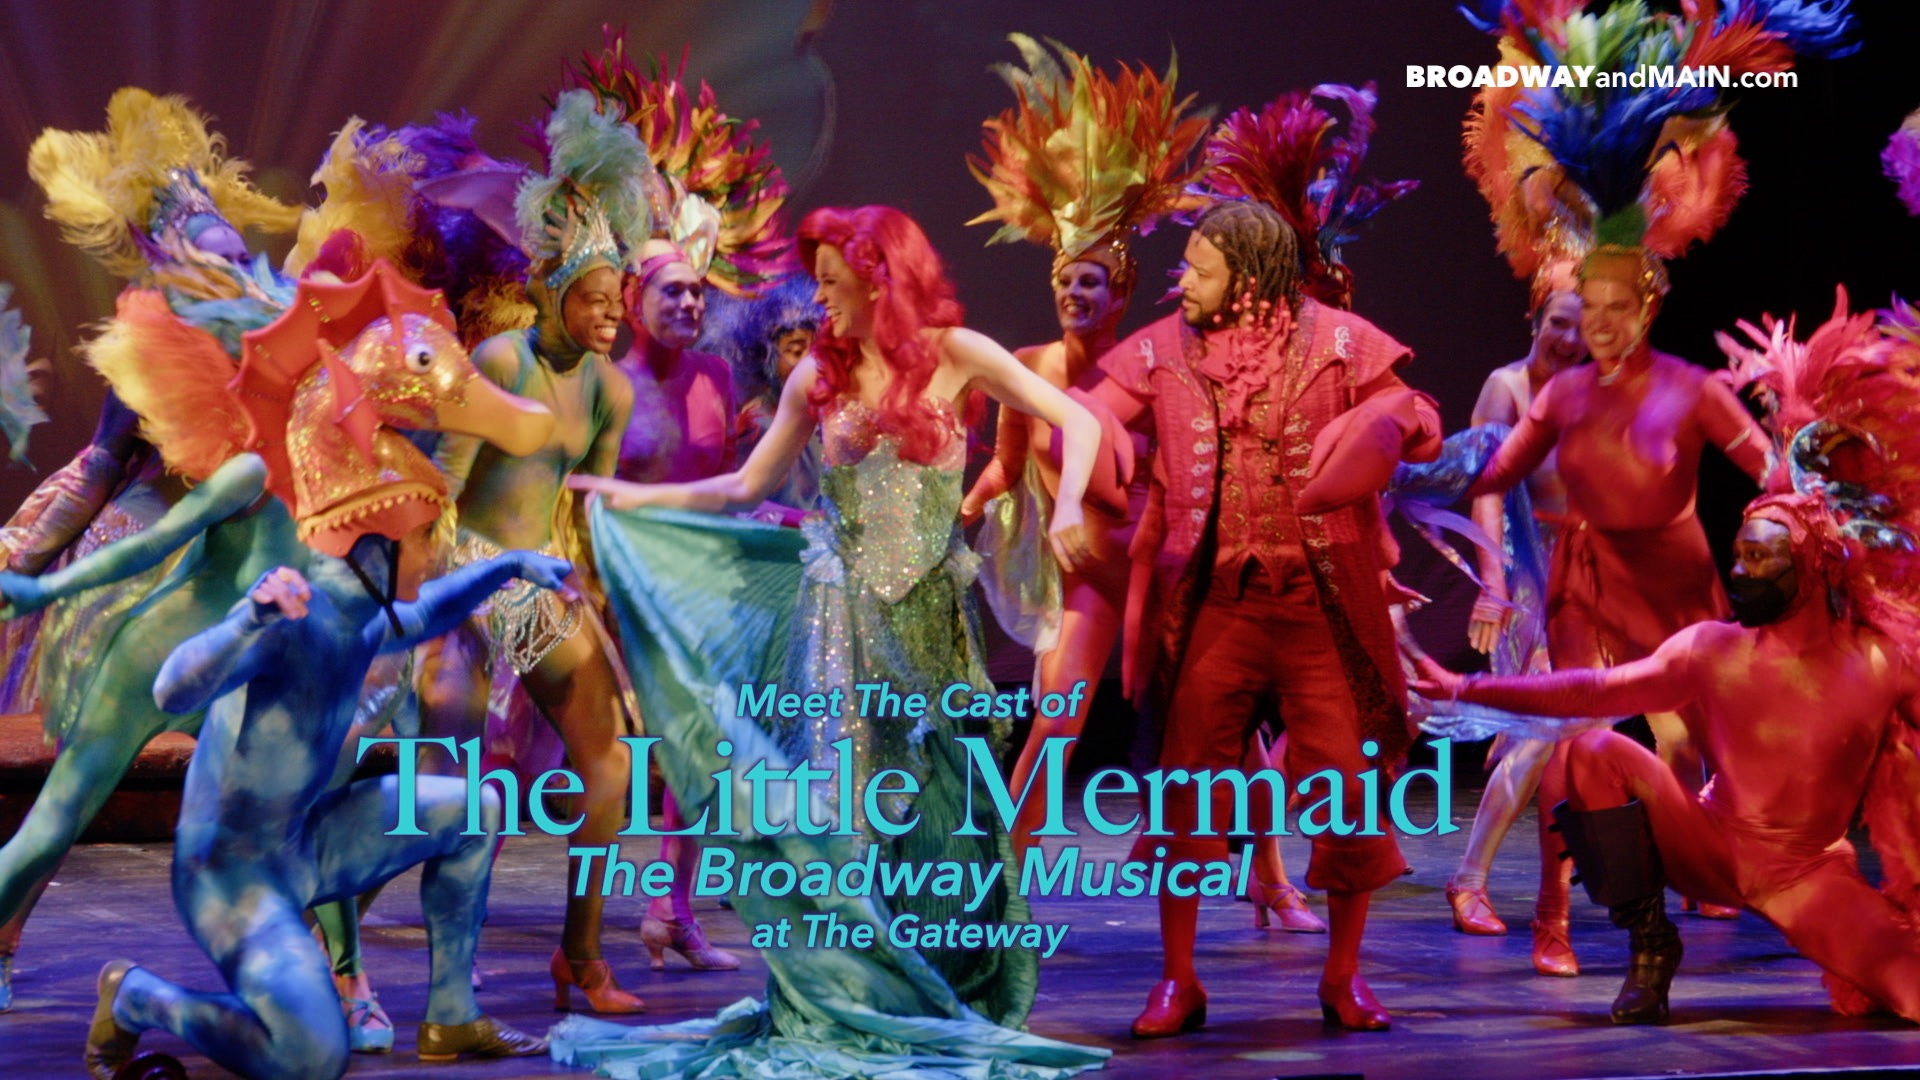 Meet The Cast of The Little Mermaid The Broadway Musical at The Gateway